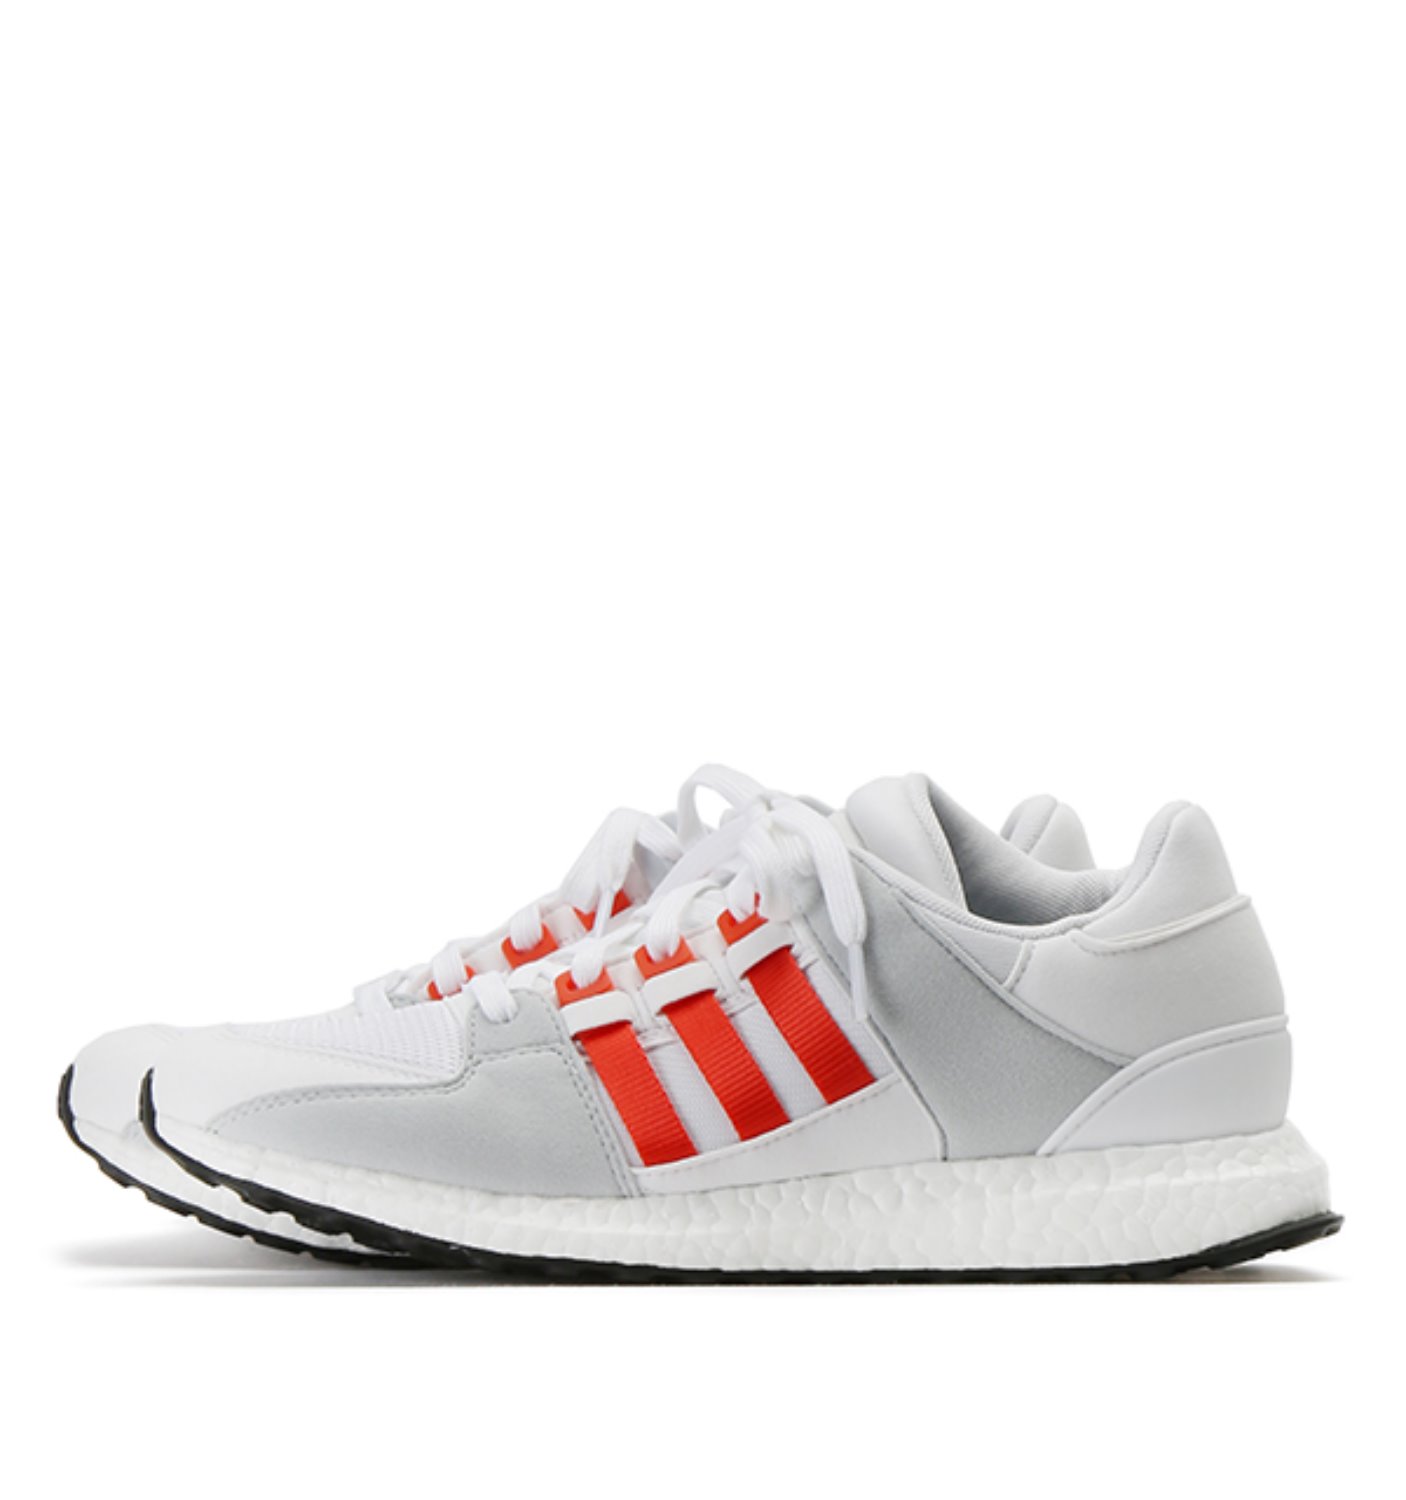 EQT SUPPORT ULTRA (BY9532) WHITE/ORANGE